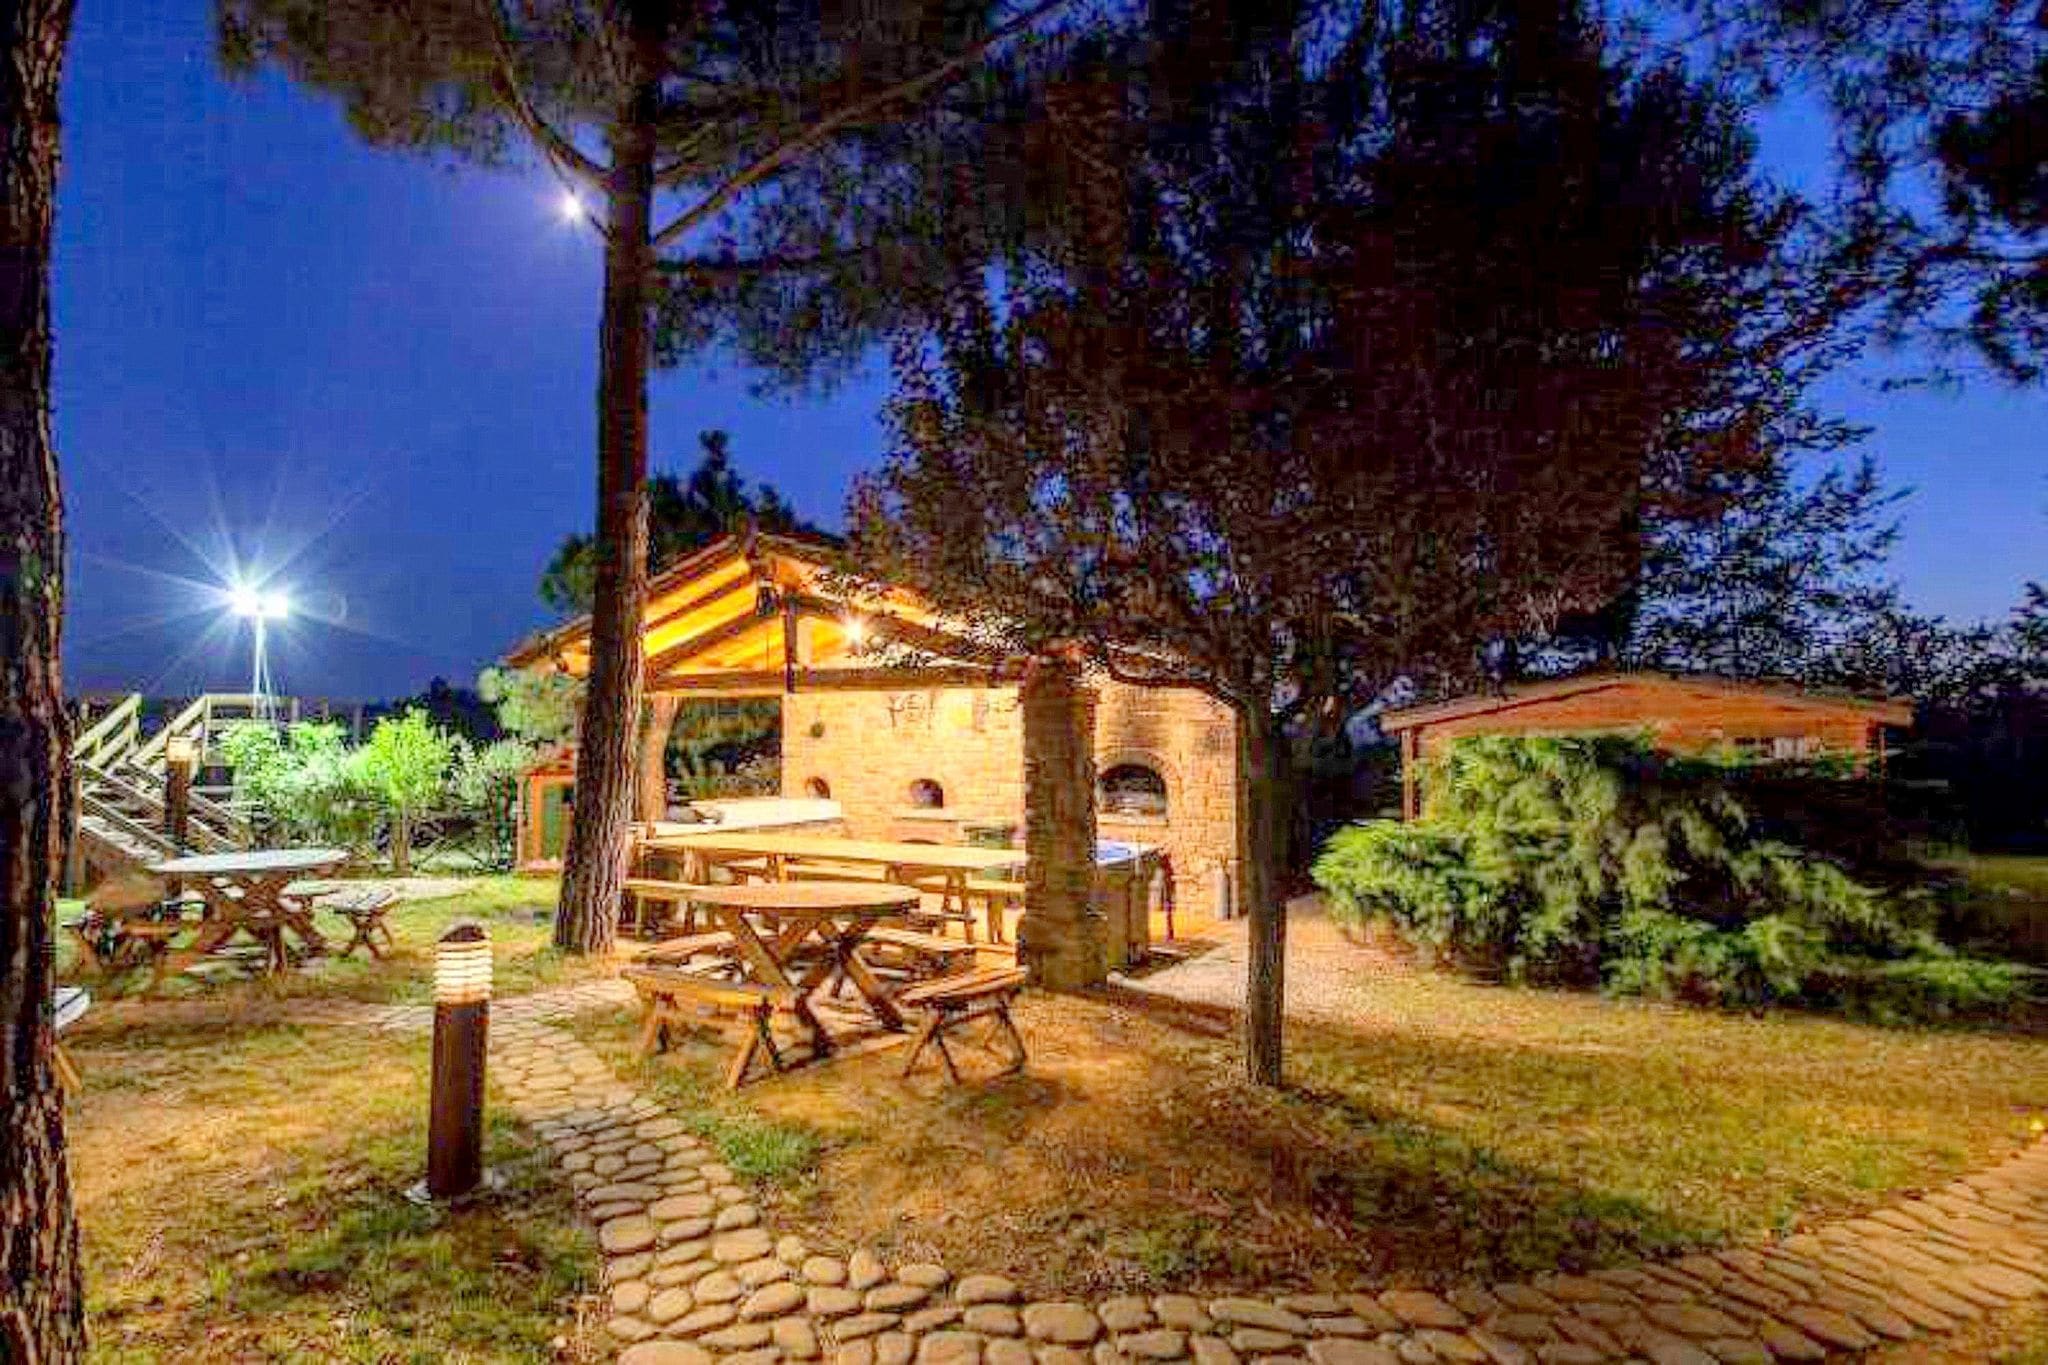 Colours and scents from Tuscany await you in this wonderful property